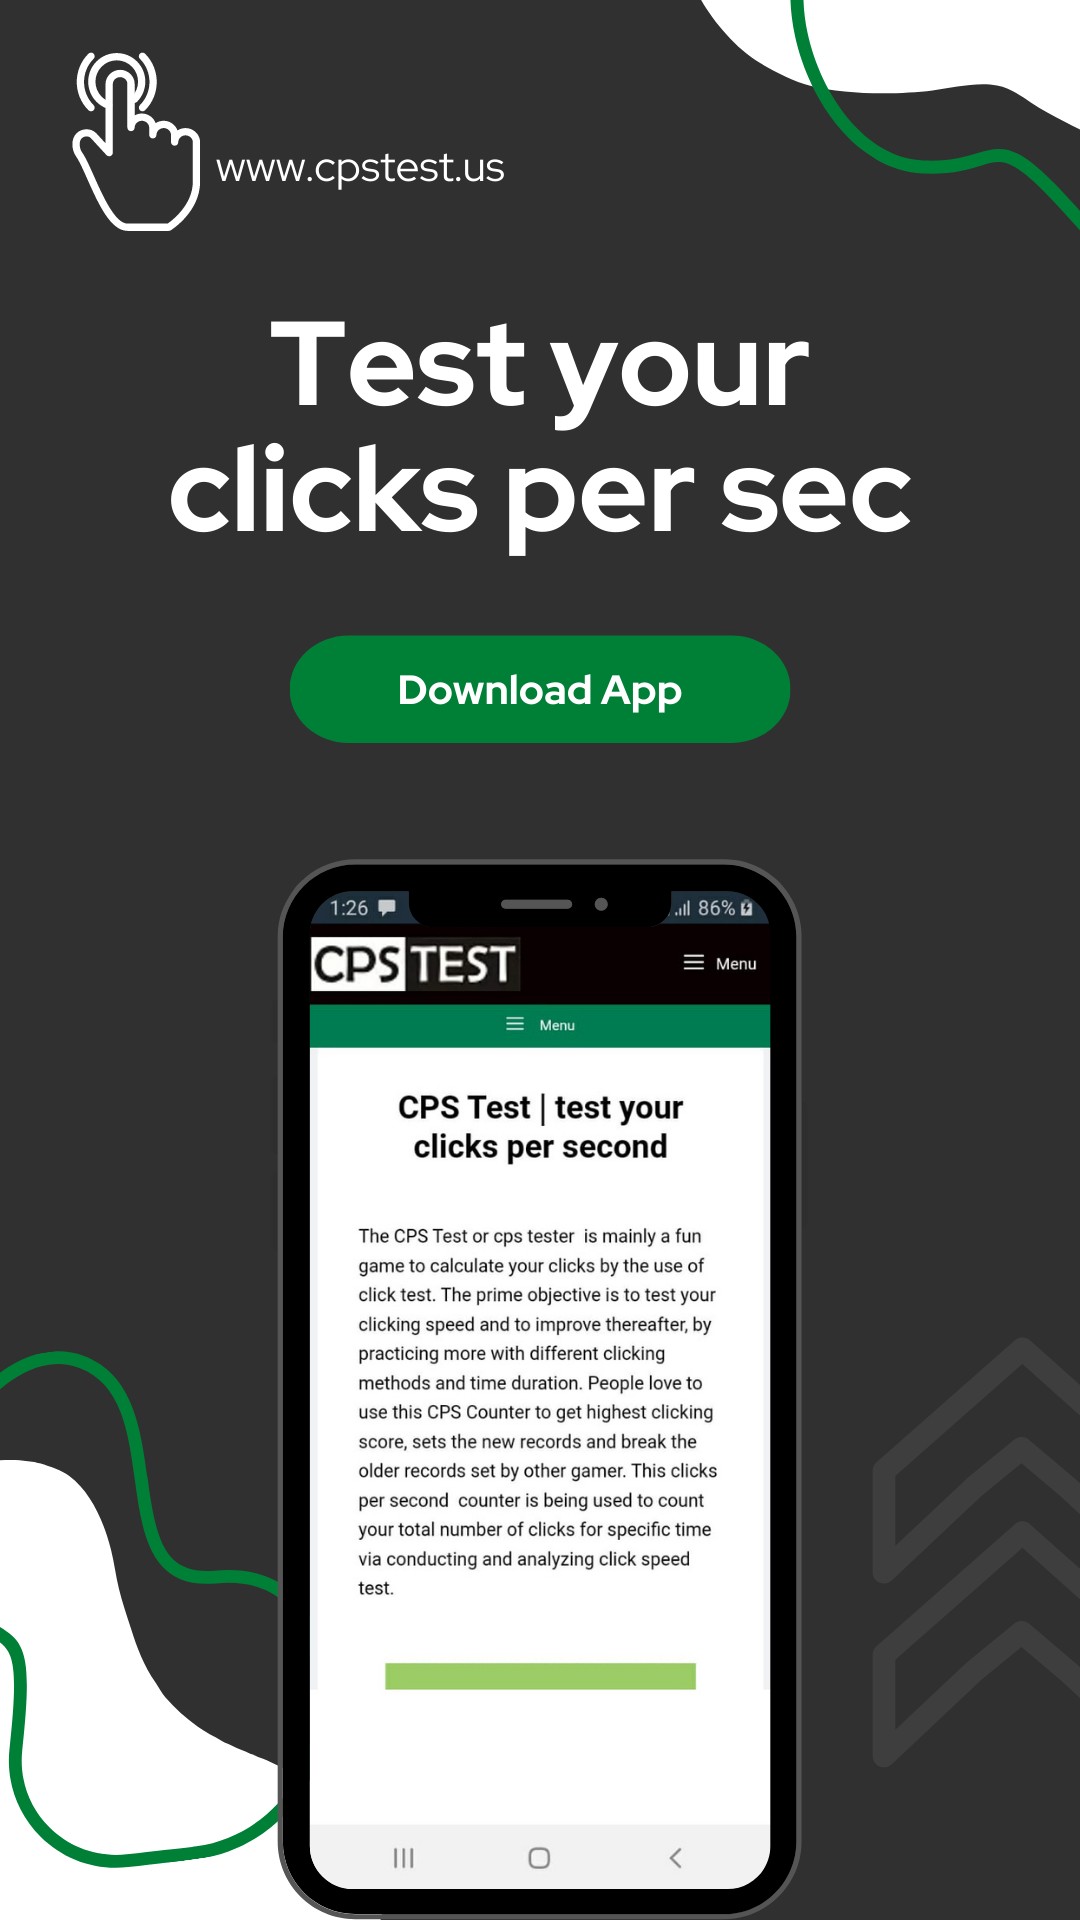 CPS Counter - CPS Test to Improve Clicks Per Second